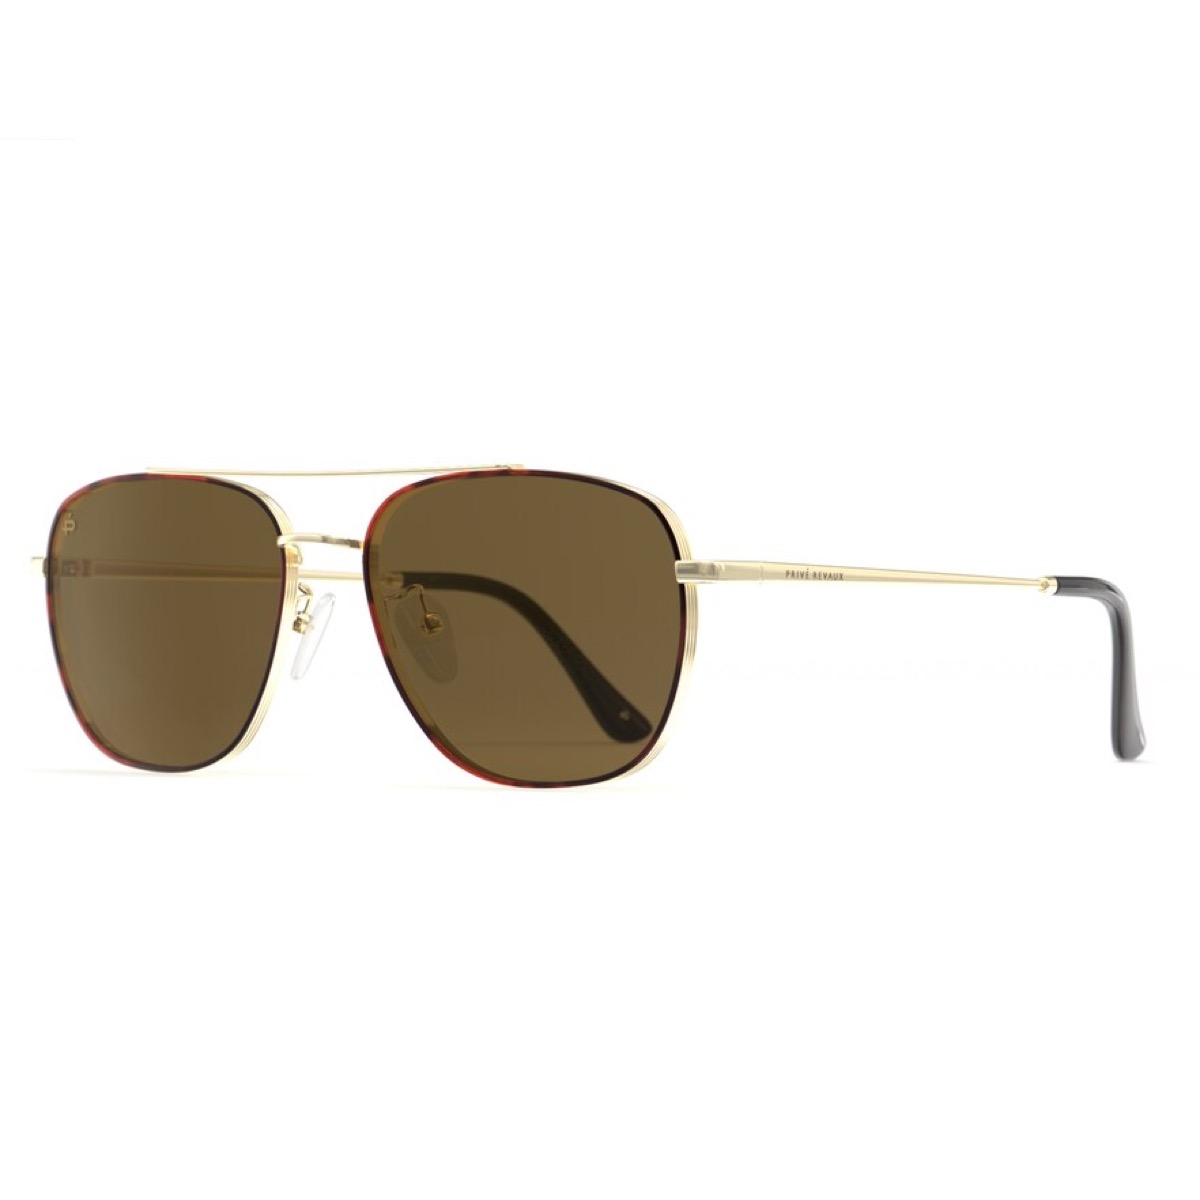 brown aviator sunglasses with gold frames